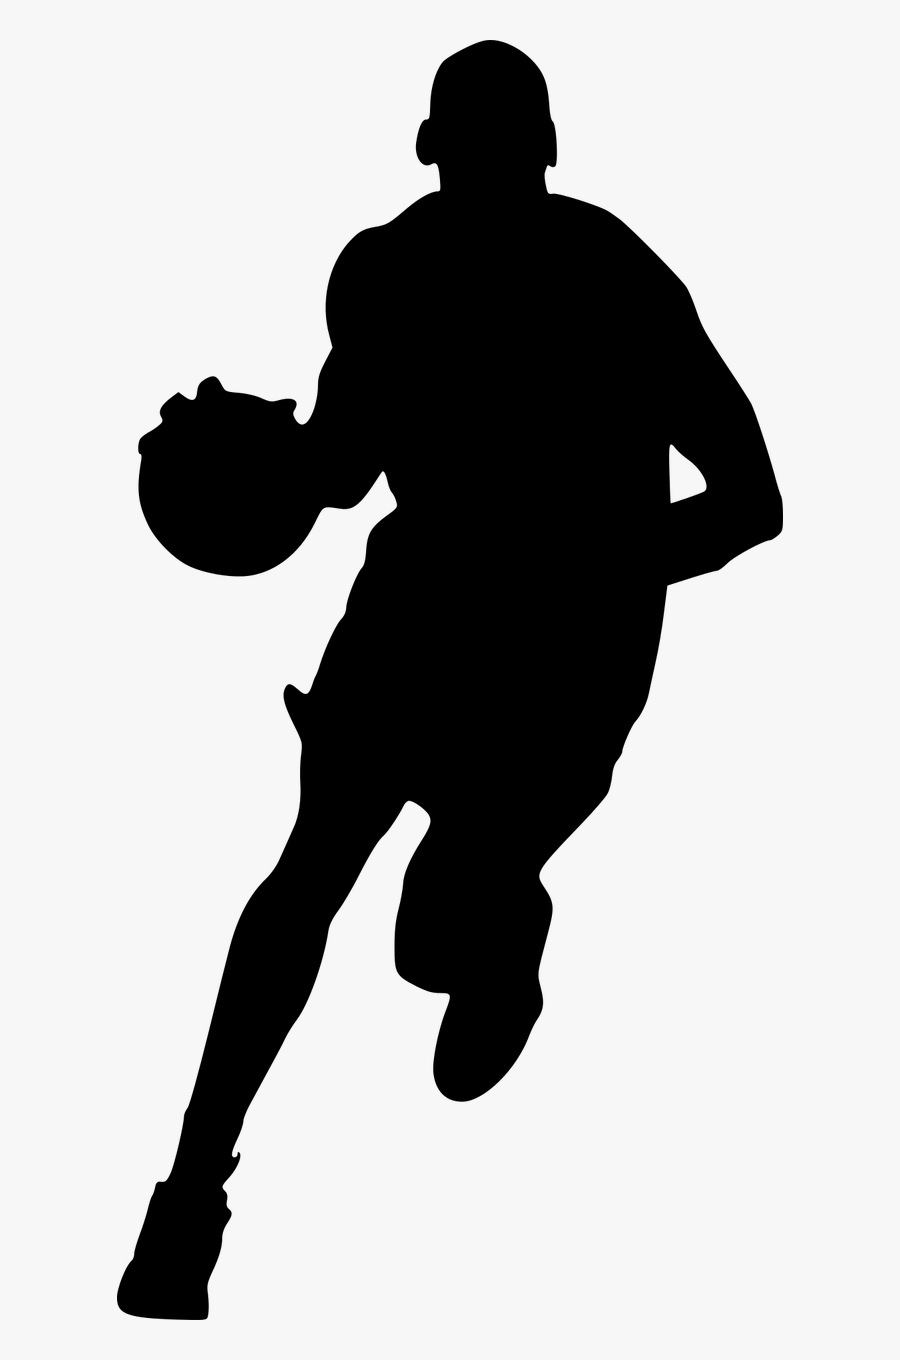 Silhouette Basketball Dunking Free Picture - Dunking Basketball Player Silhouette, Transparent Clipart